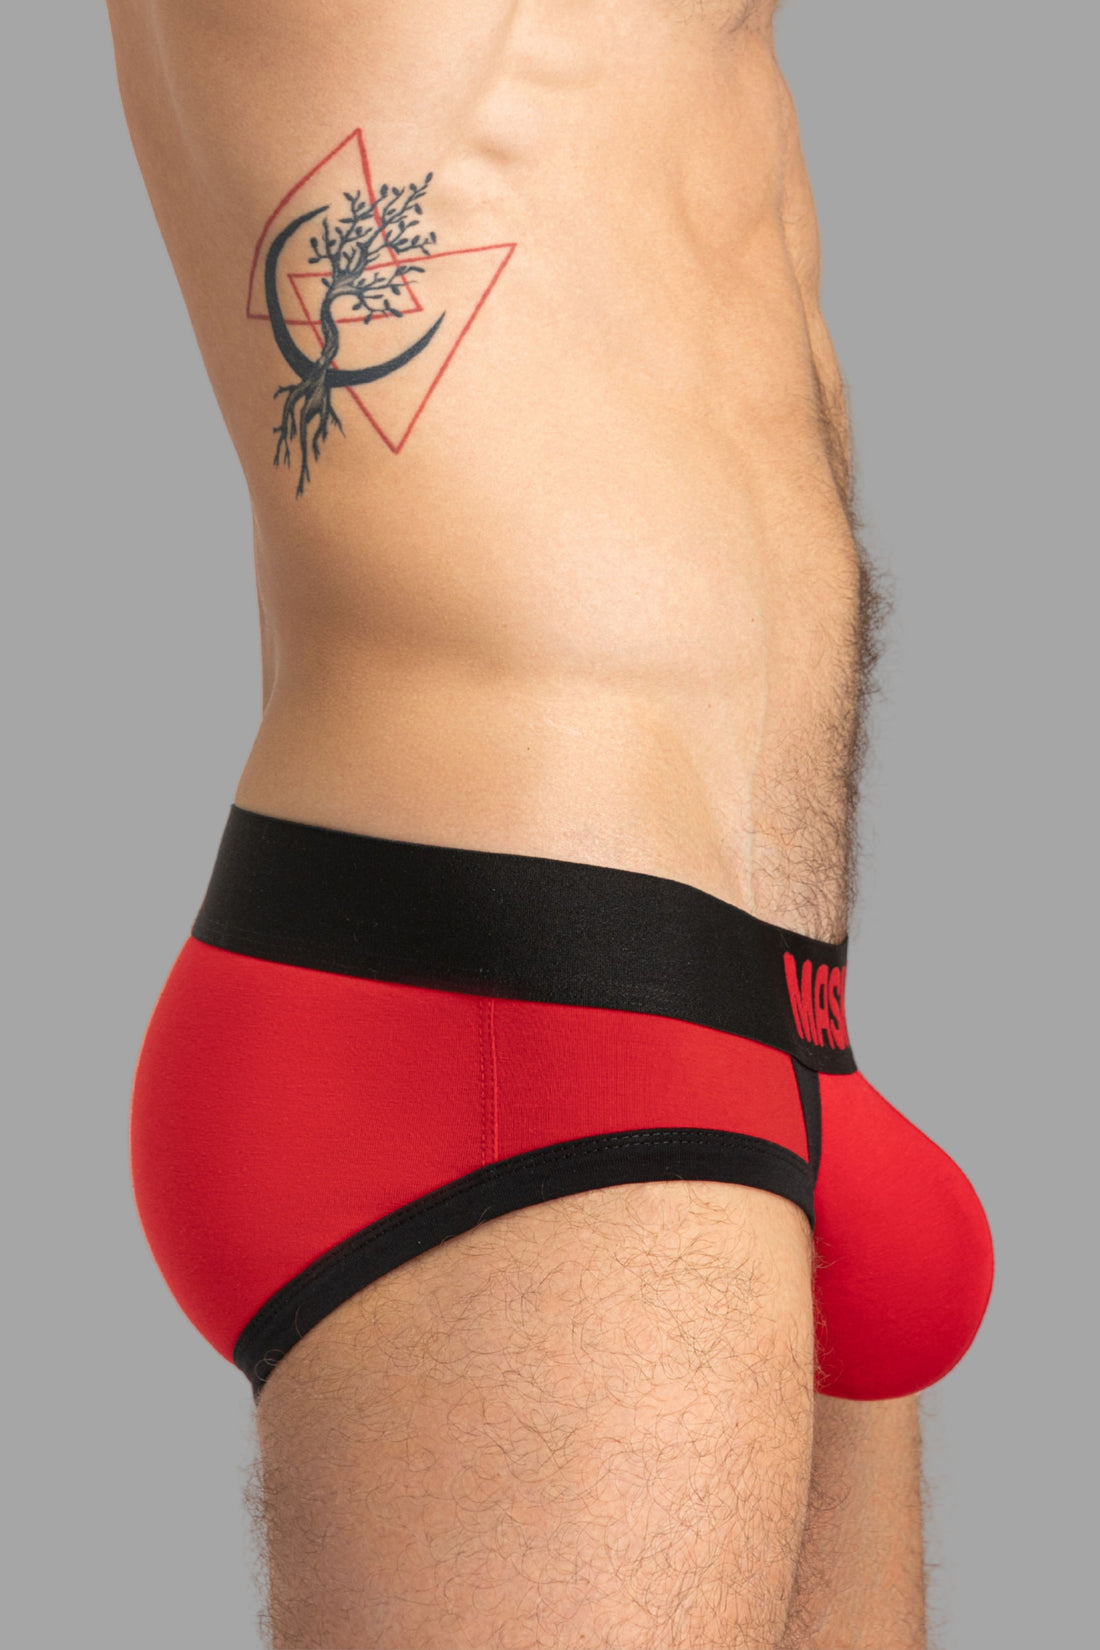 CAPTAIN-A Briefs with O-Inside-POUCH. Red+Black